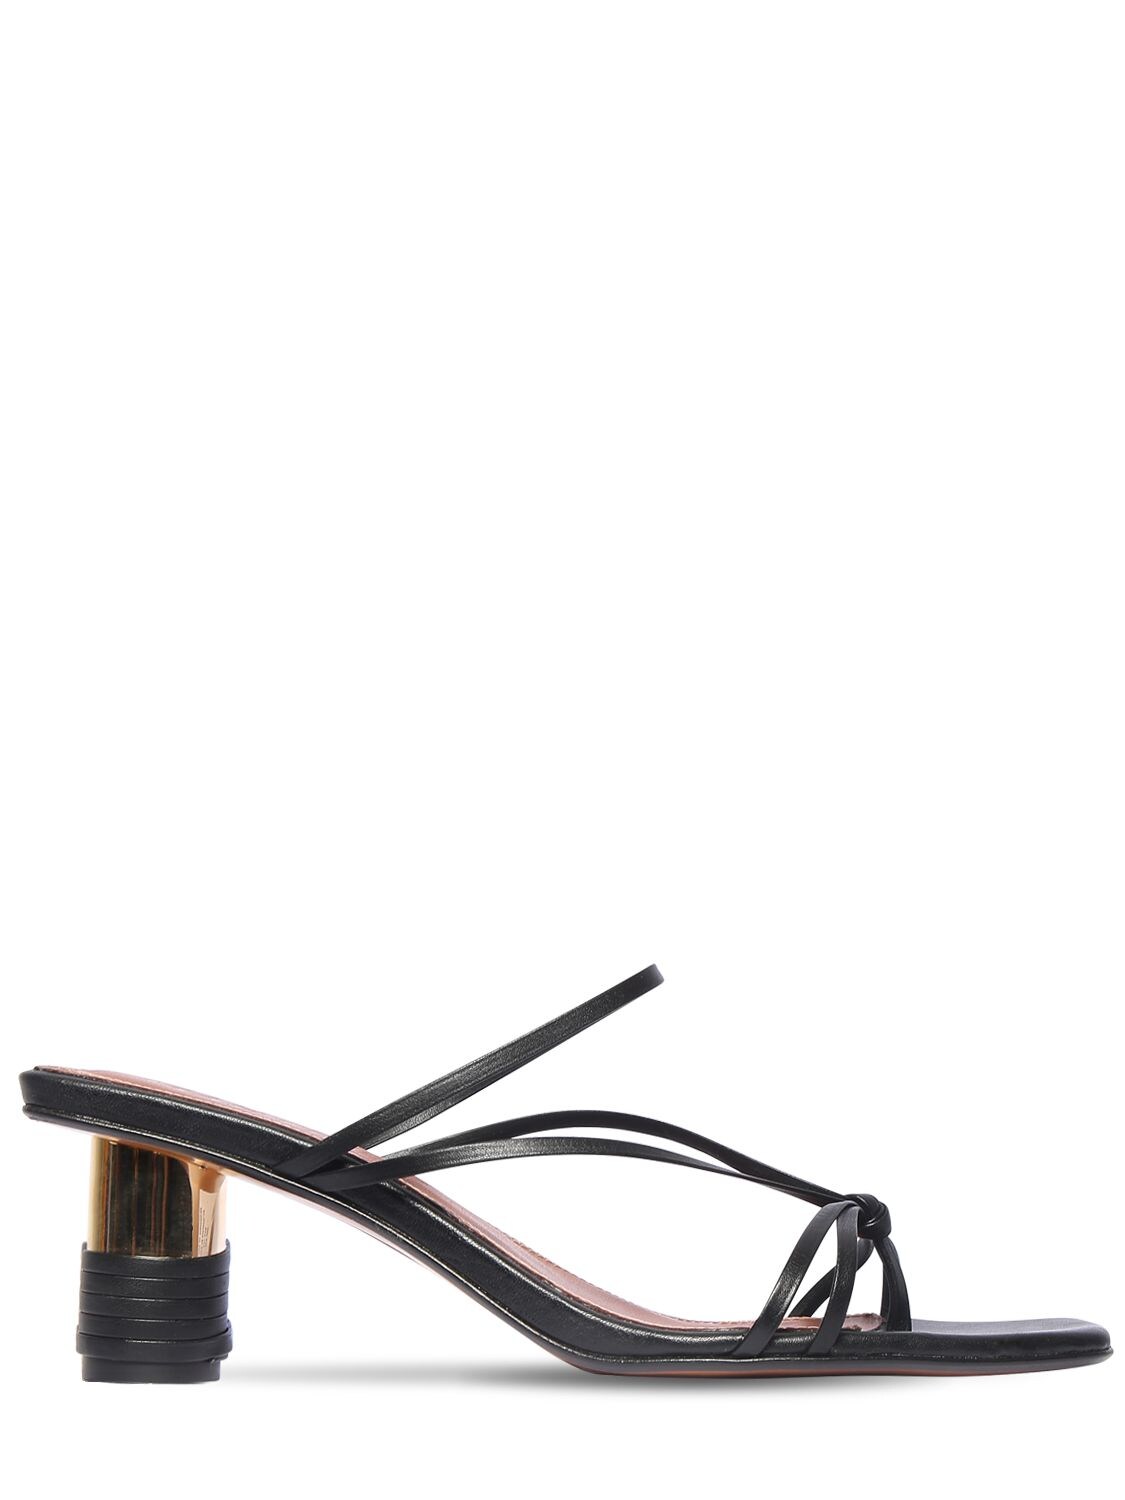 Souliers Martinez 55mm Leather Sandals In Black